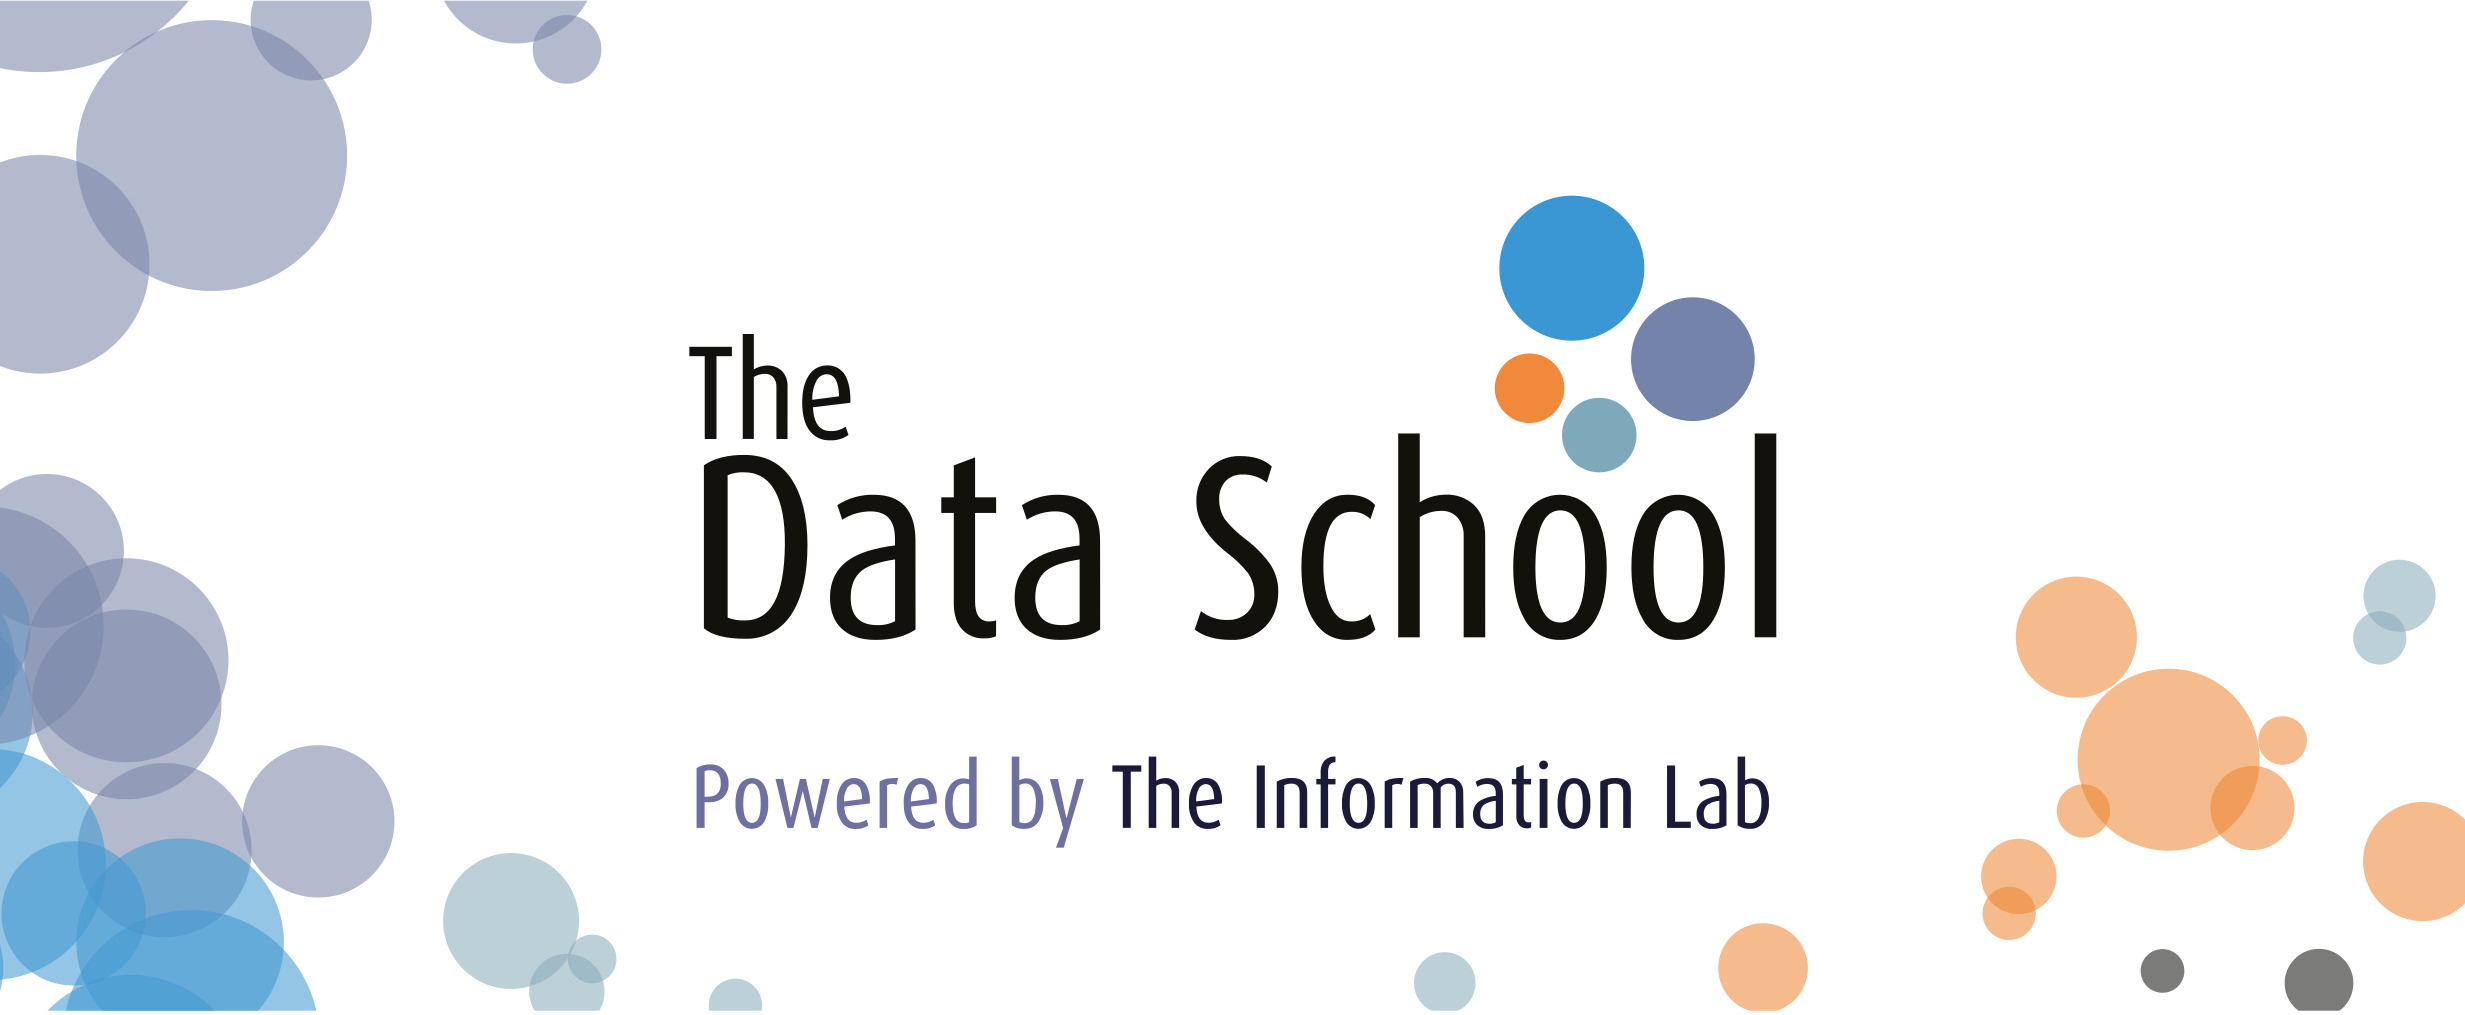 The Data School Powered by The Information Lab